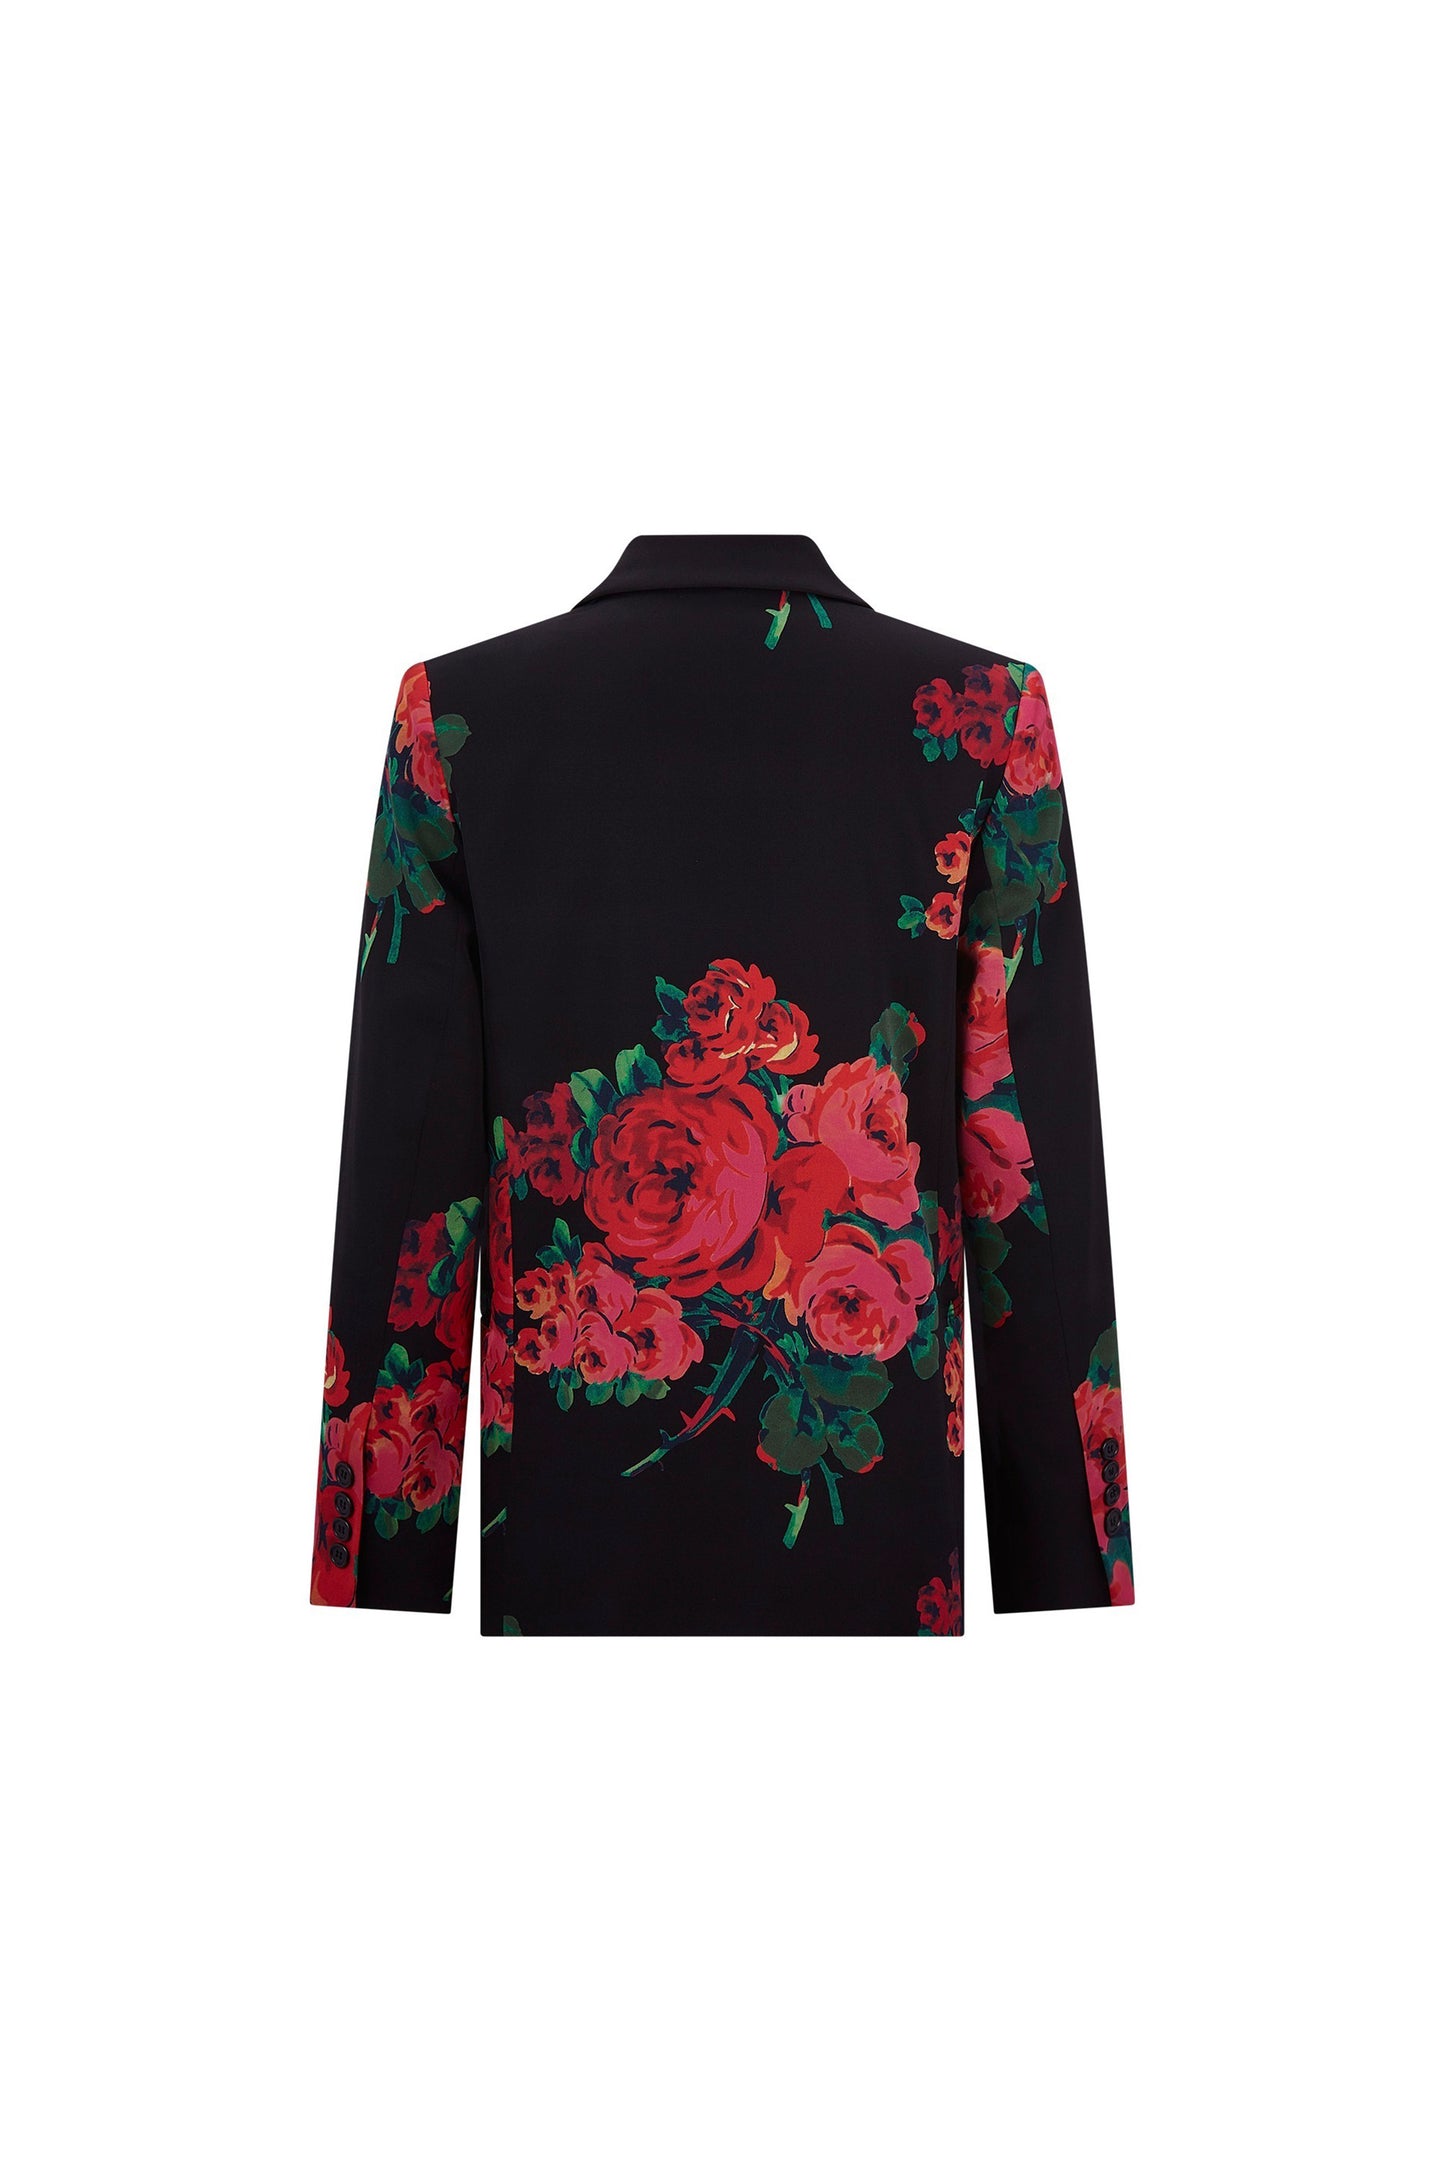 'SEVILLE ROSE' DOUBLE BREASTED JACKET -  - Libertine